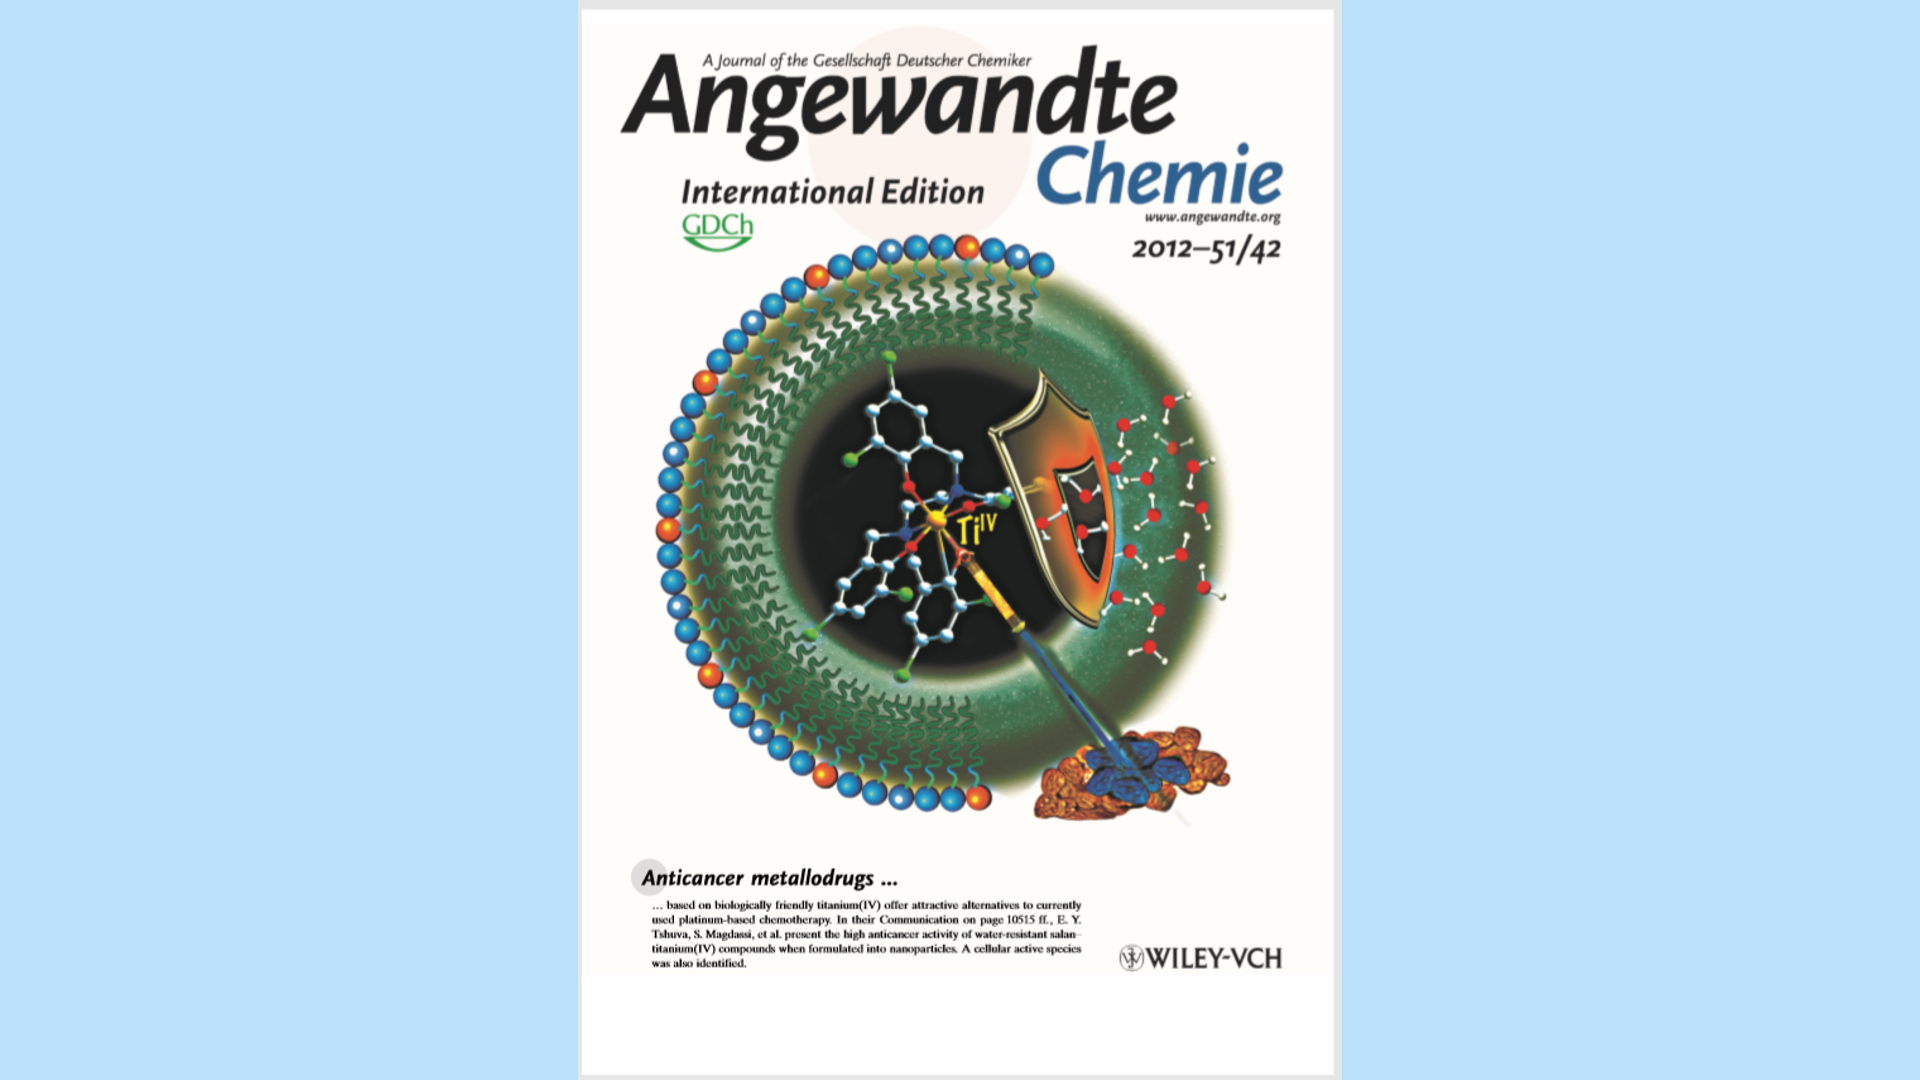 Angewandte Chemie cover, highly stable cytotoxic Titanium complexes in nano formulations